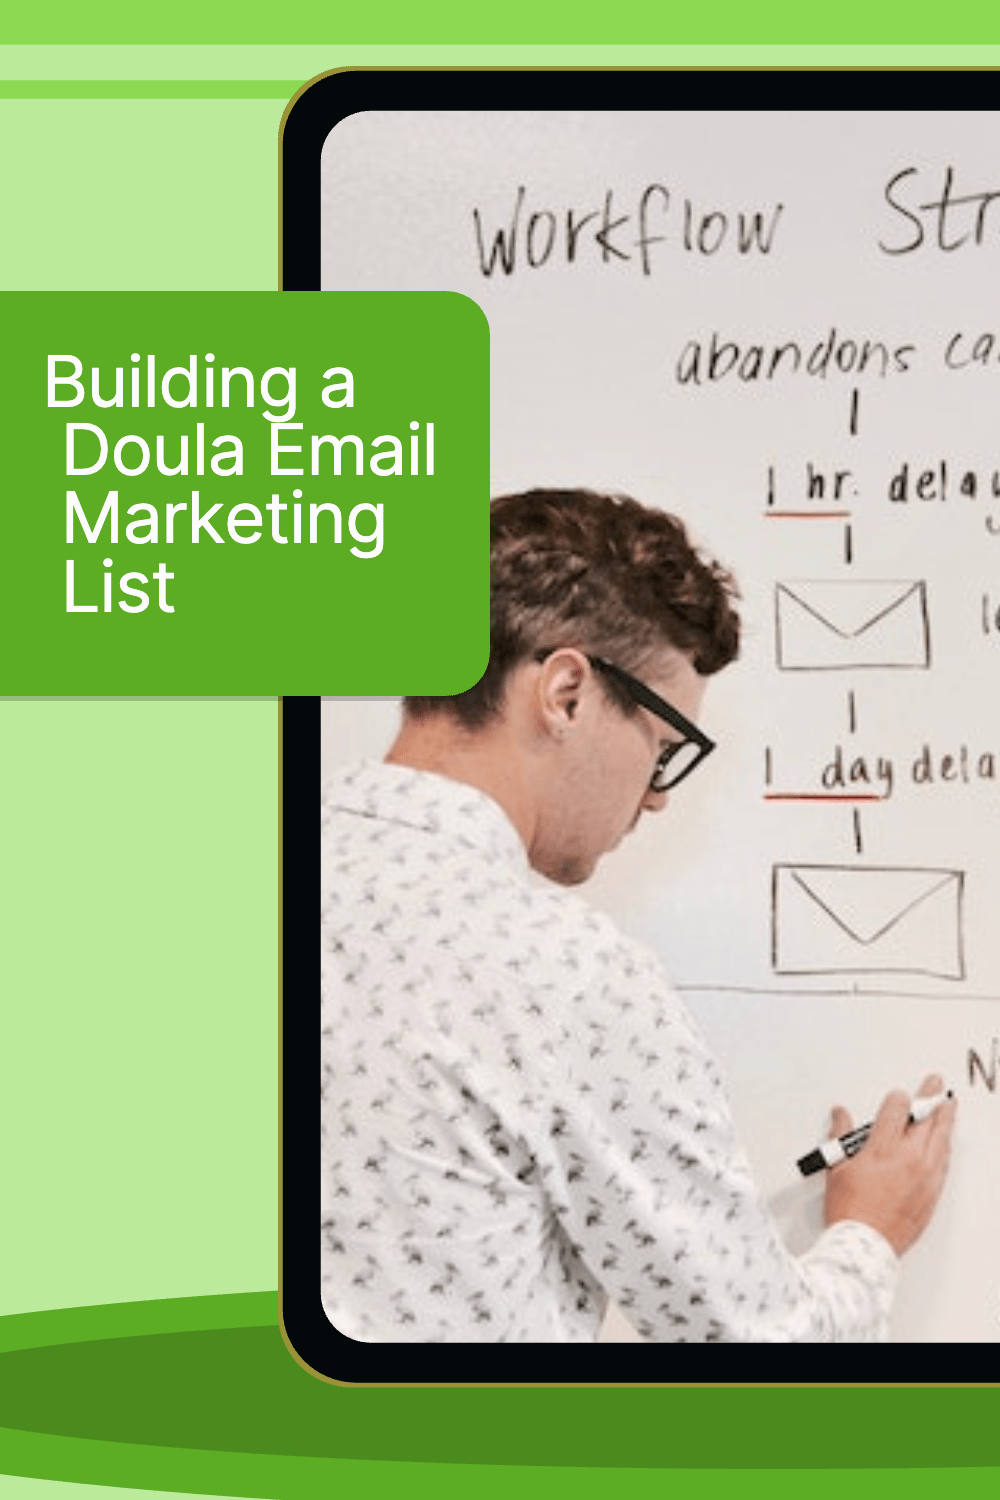 Building a dual Doula email marketing list.